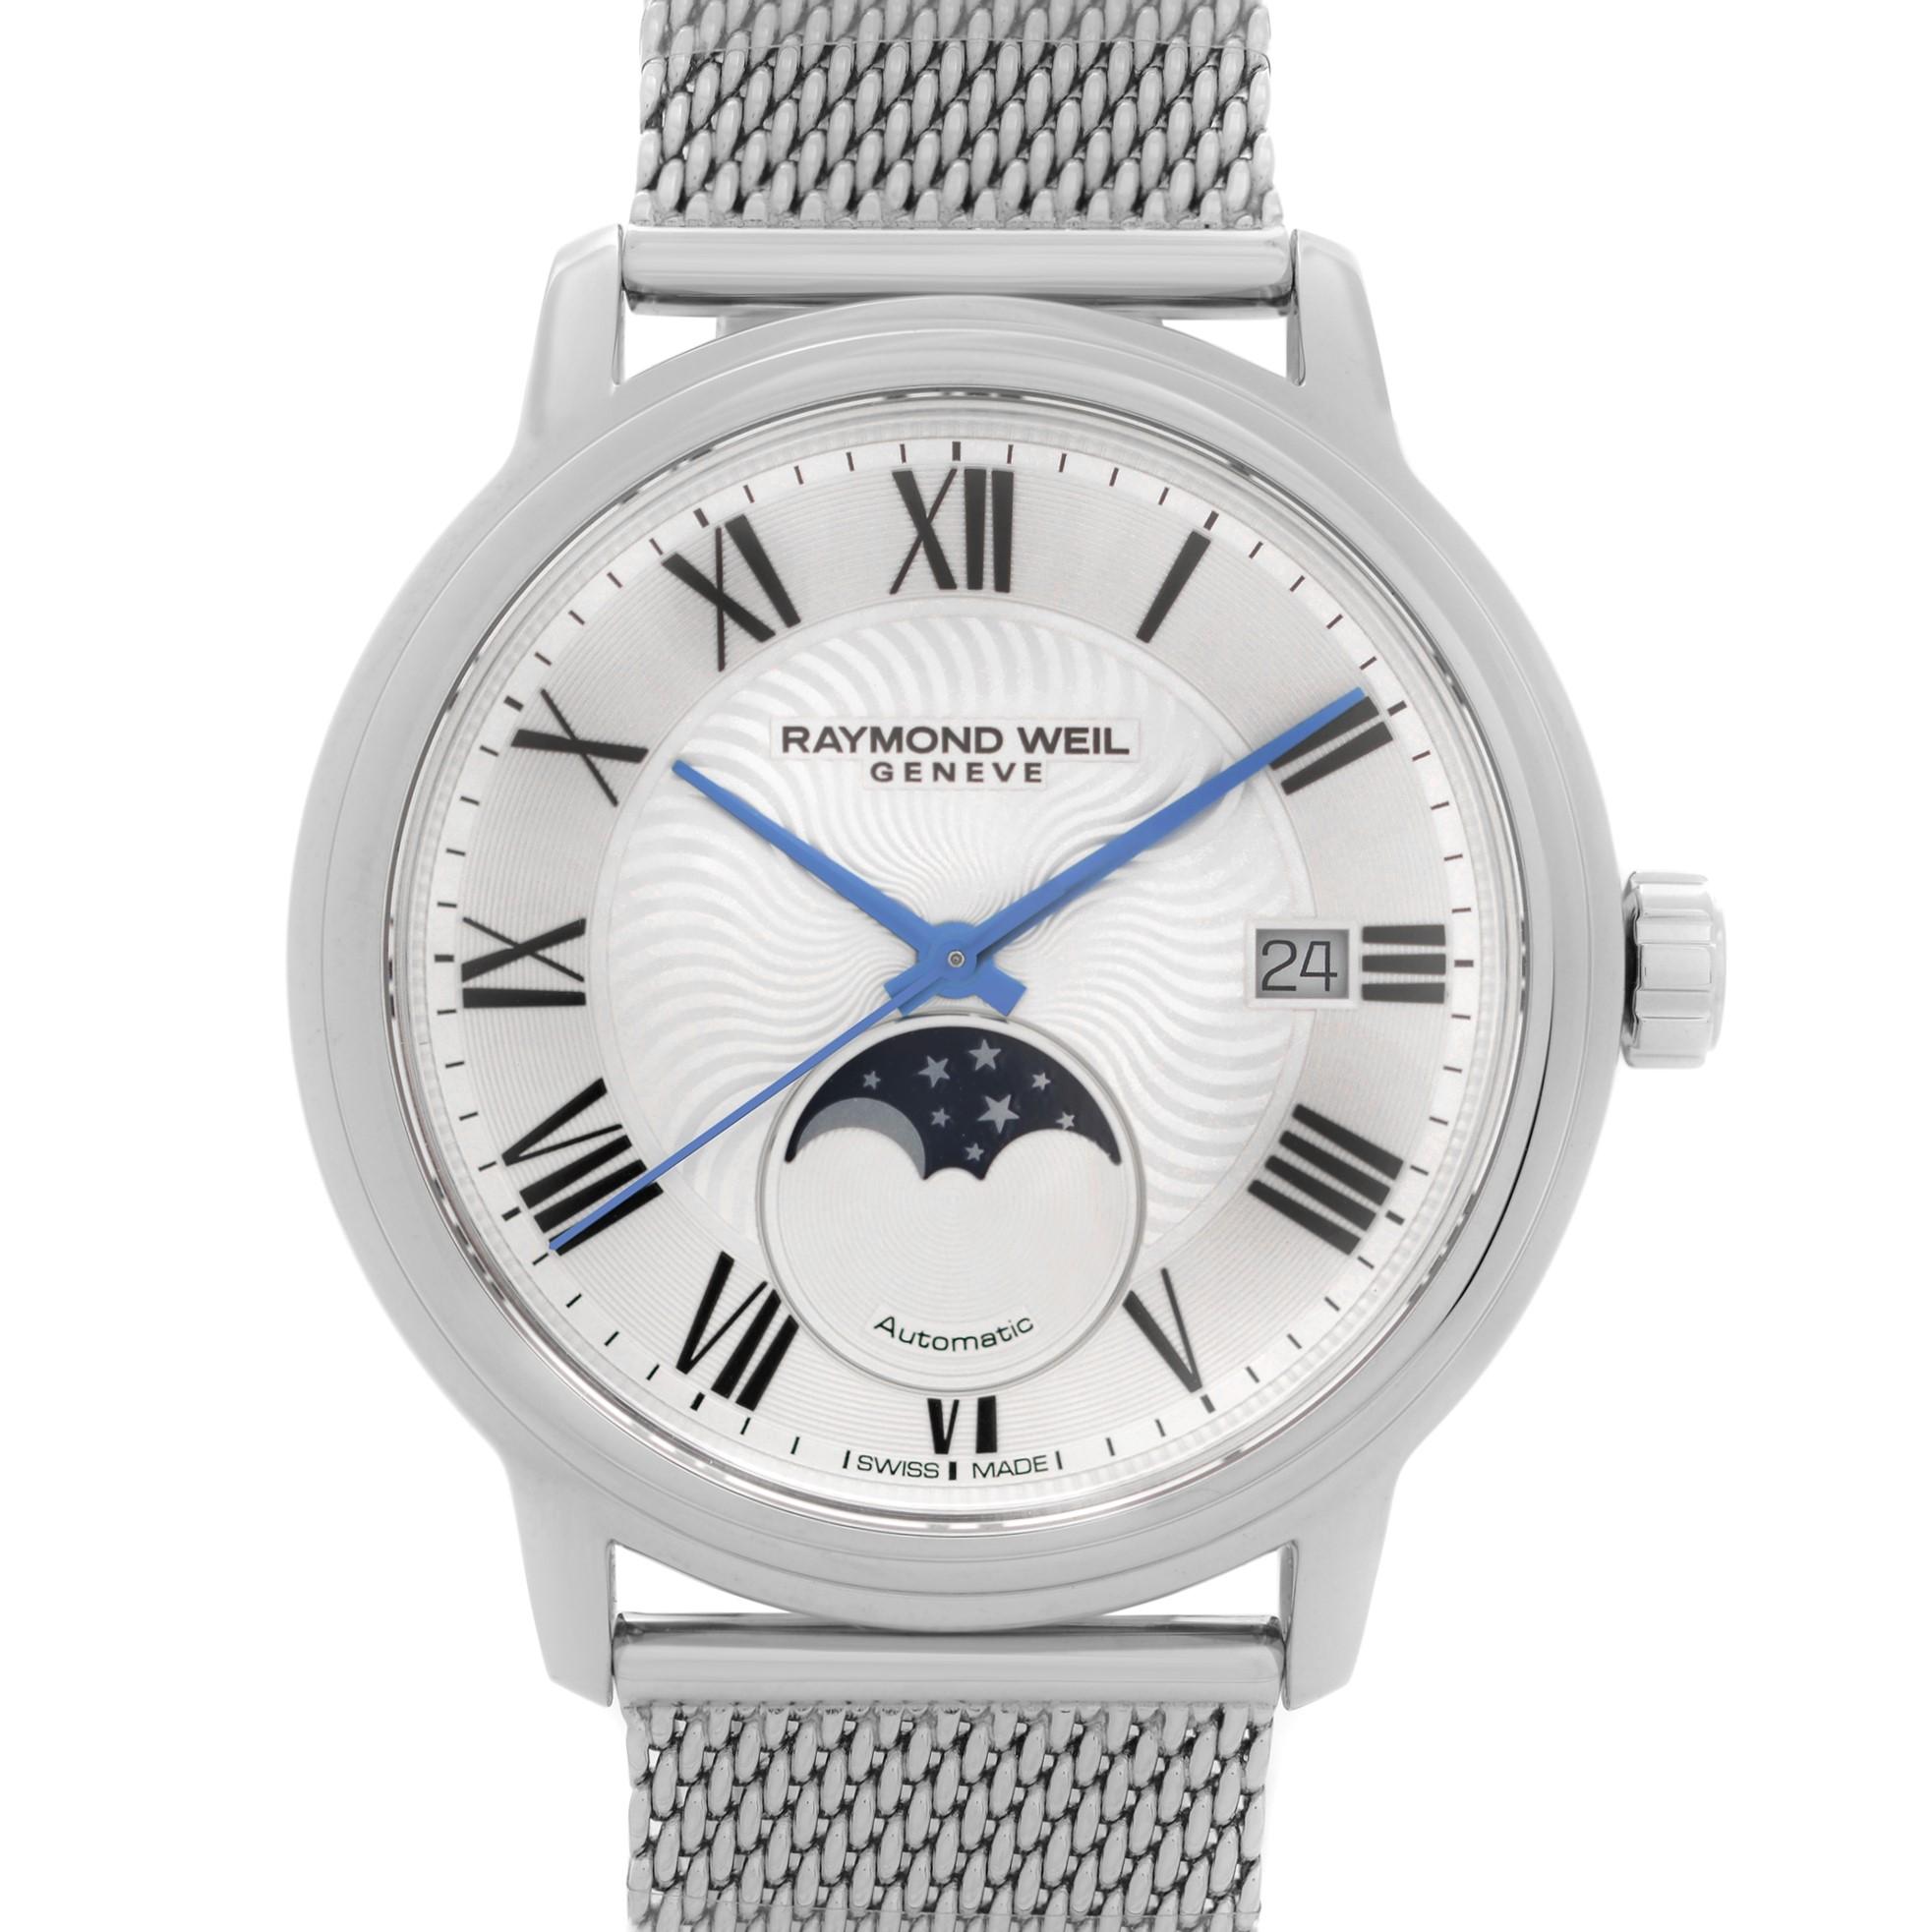 Unworn Raymond Weil Maestro Moonphase Steel Silver Roman Dial Men's Watch 2239M-ST-00659. This Beautiful Timepiece Features: Stainless Steel Case with a Stainless Steel Mesh Bracelet, Fixed Stainless Steel Bezel, Silver Dial with Blue Hands, and